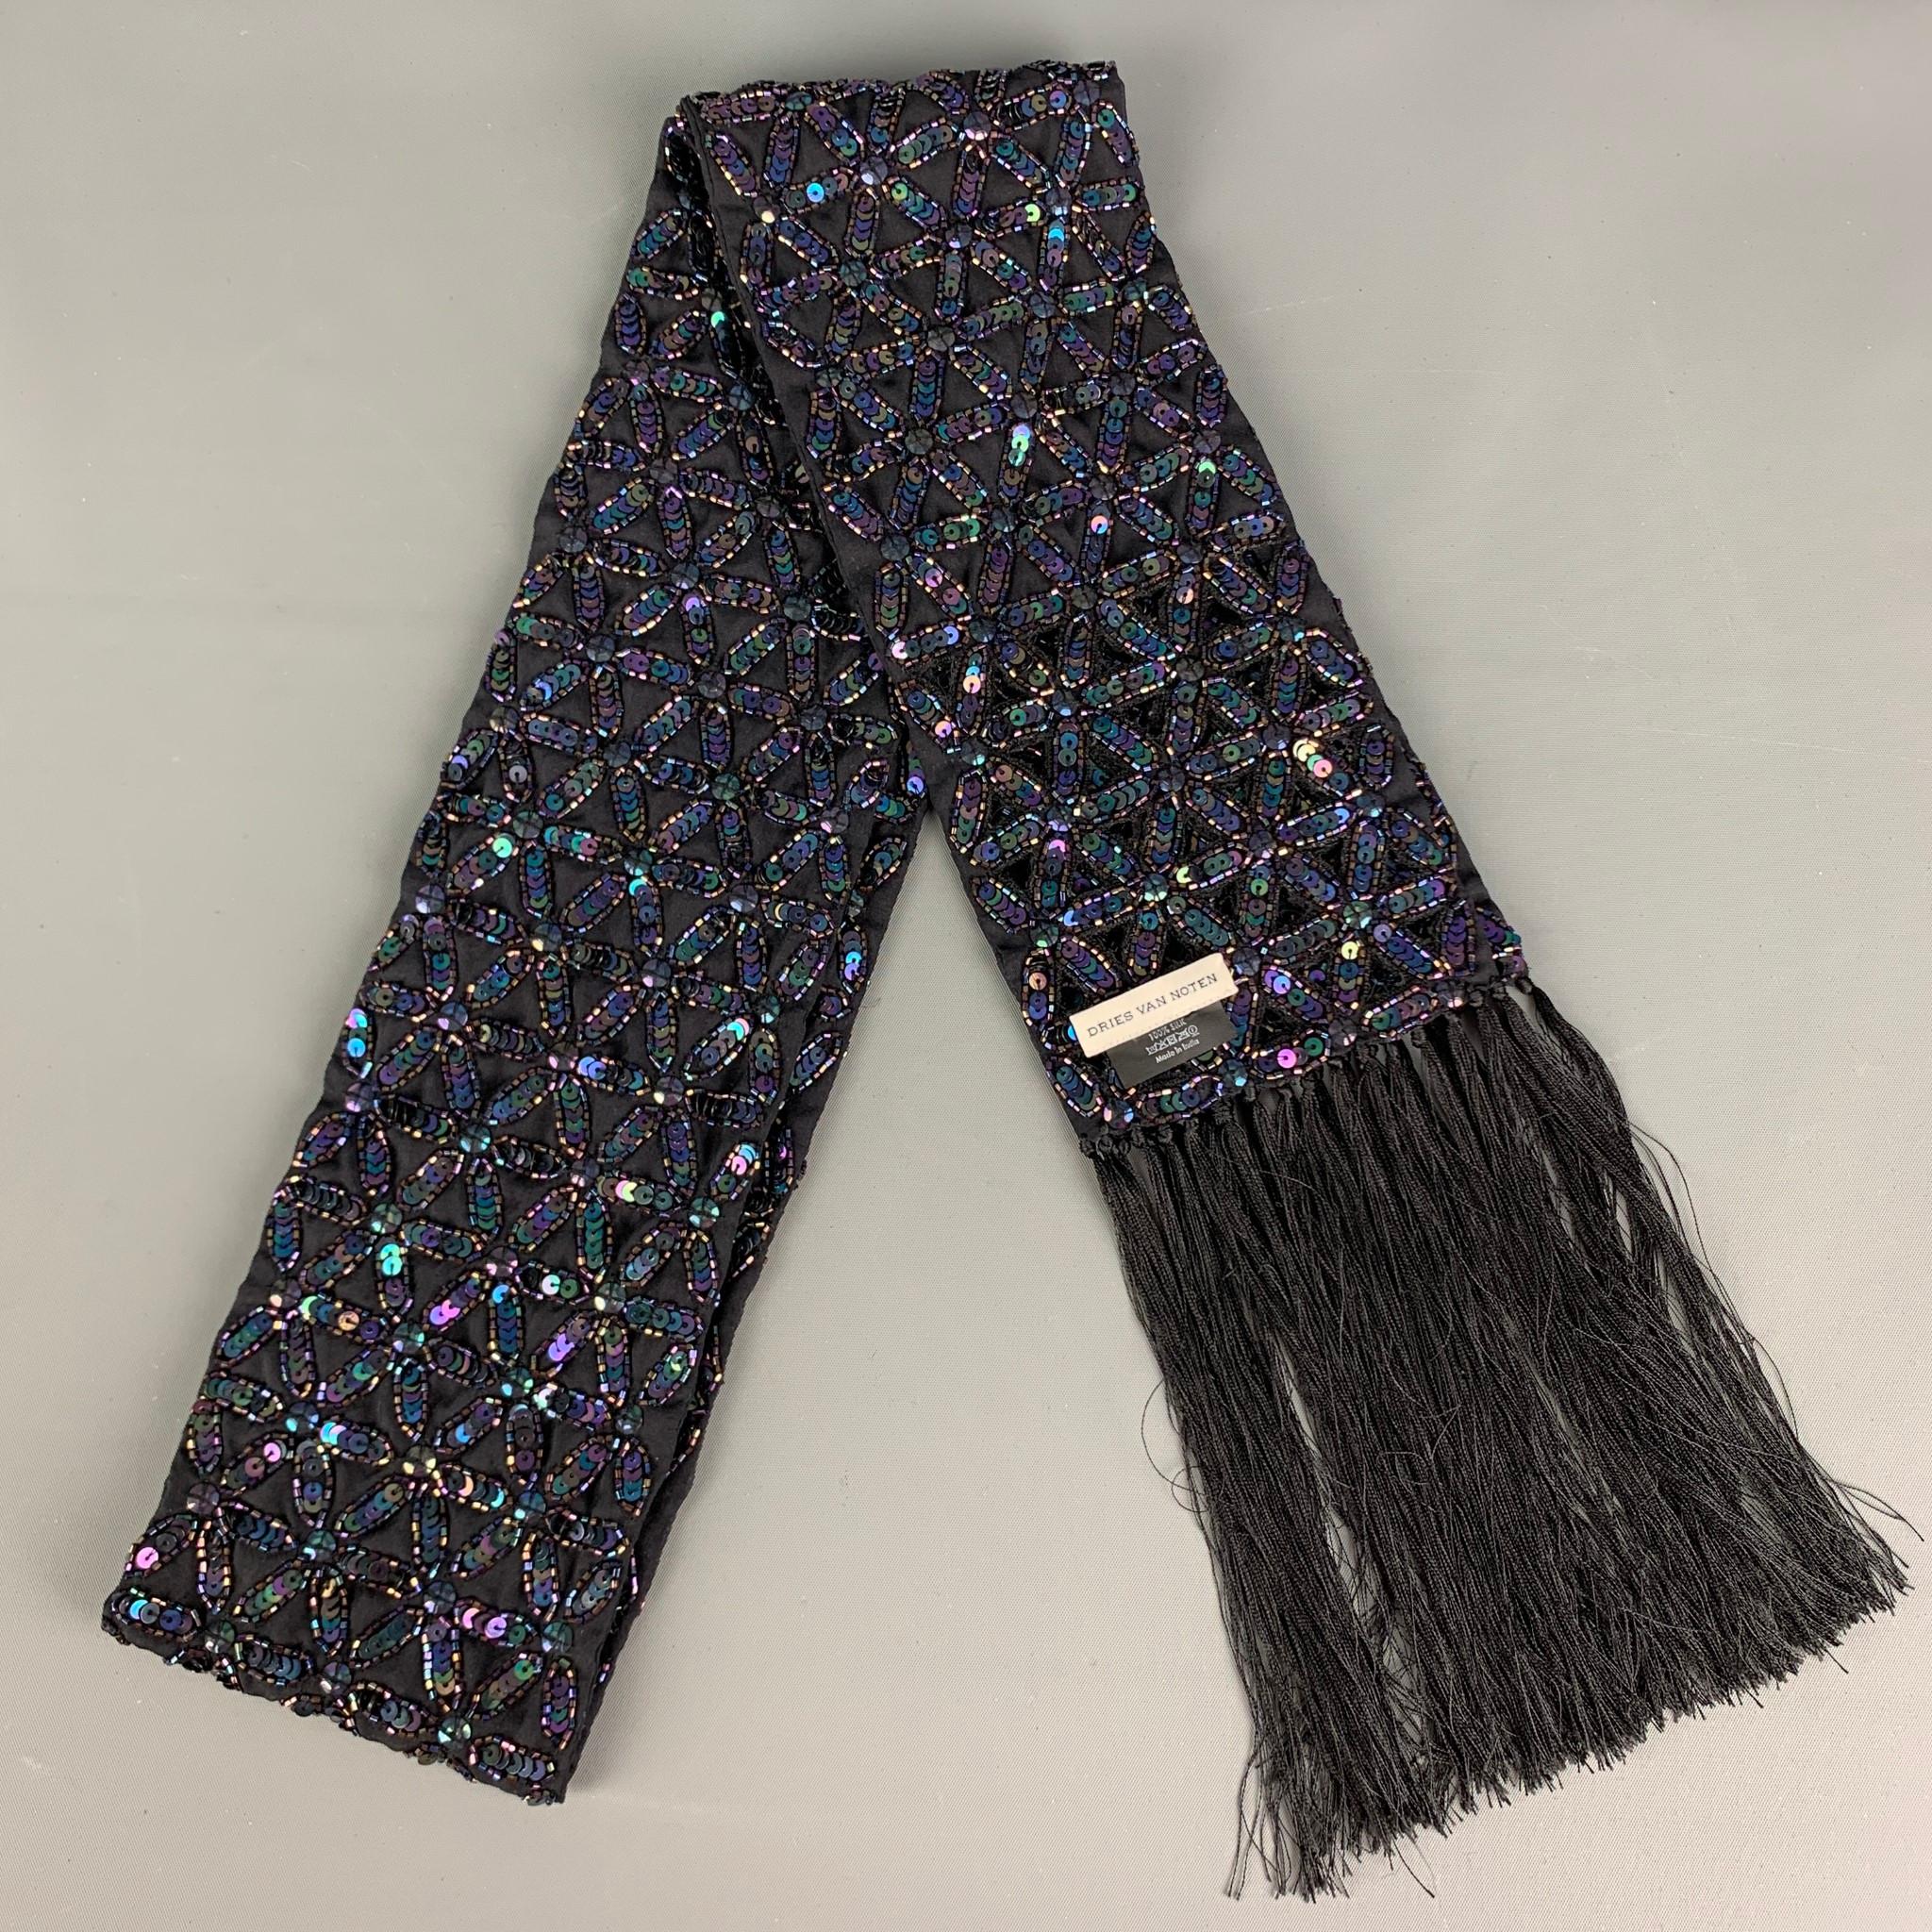 DRIES VAN NOTEN scarf comes in a navy silk woven material featuring flowers motif, beaded and sequins embroidery.

Excellent Pre-Owned Condition.

Length: 63 in.
Width: 4 in.

 

SKU: 124473
Category: Scarves

More Details
Brand: DRIES VAN